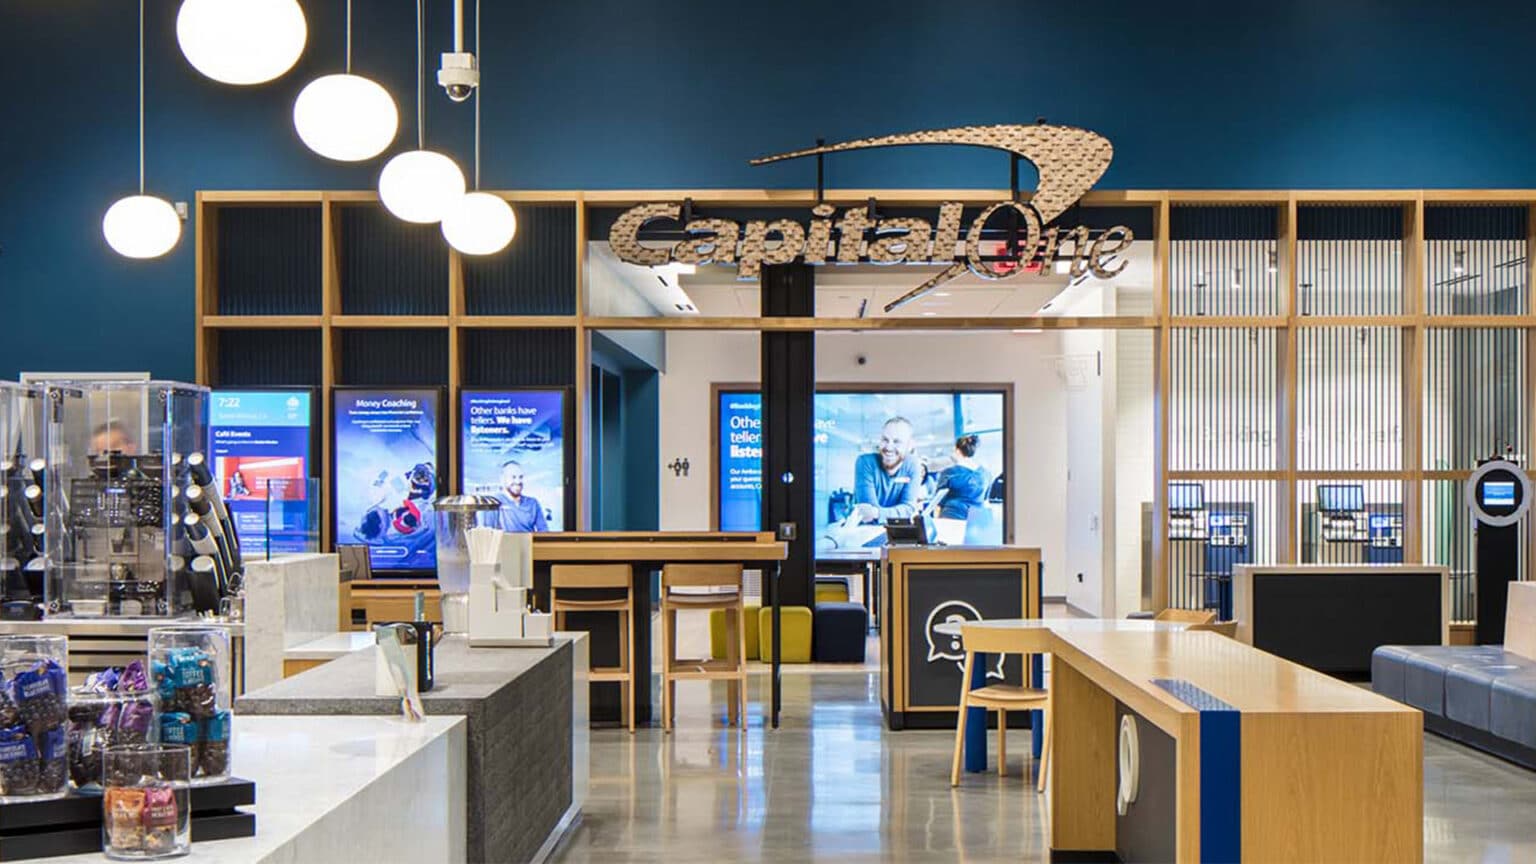 Capital One 360 CD Rates How Do they Compare?